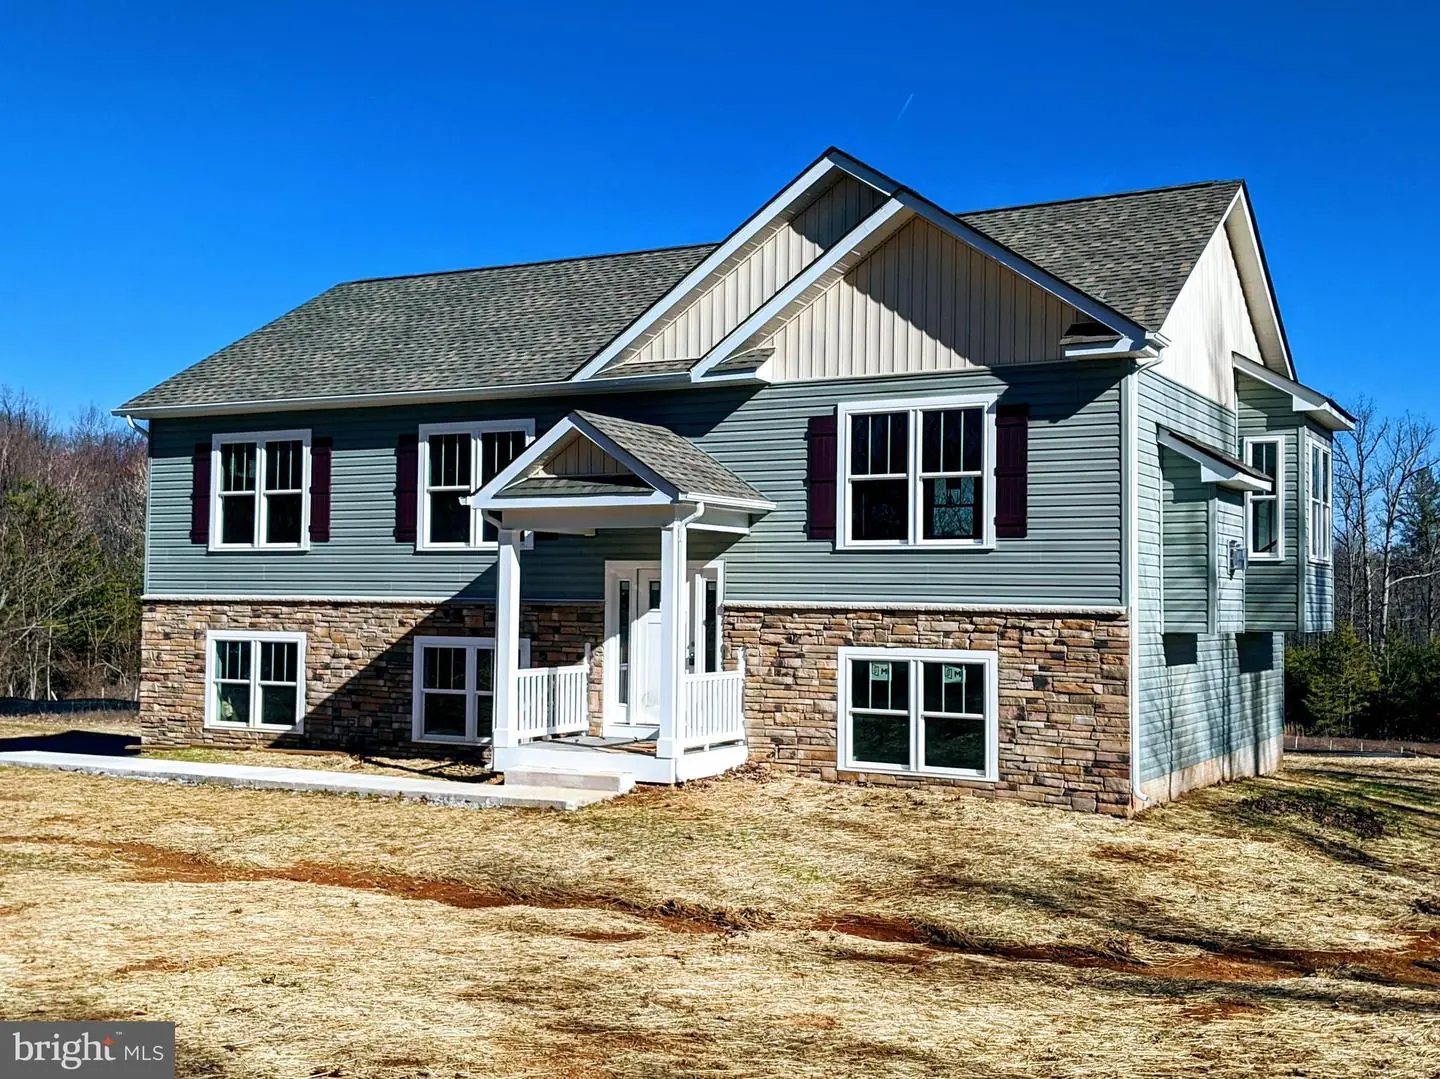 TM 40-50C FISHBACK   - REMAX Realty Group Rehoboth Real Estate